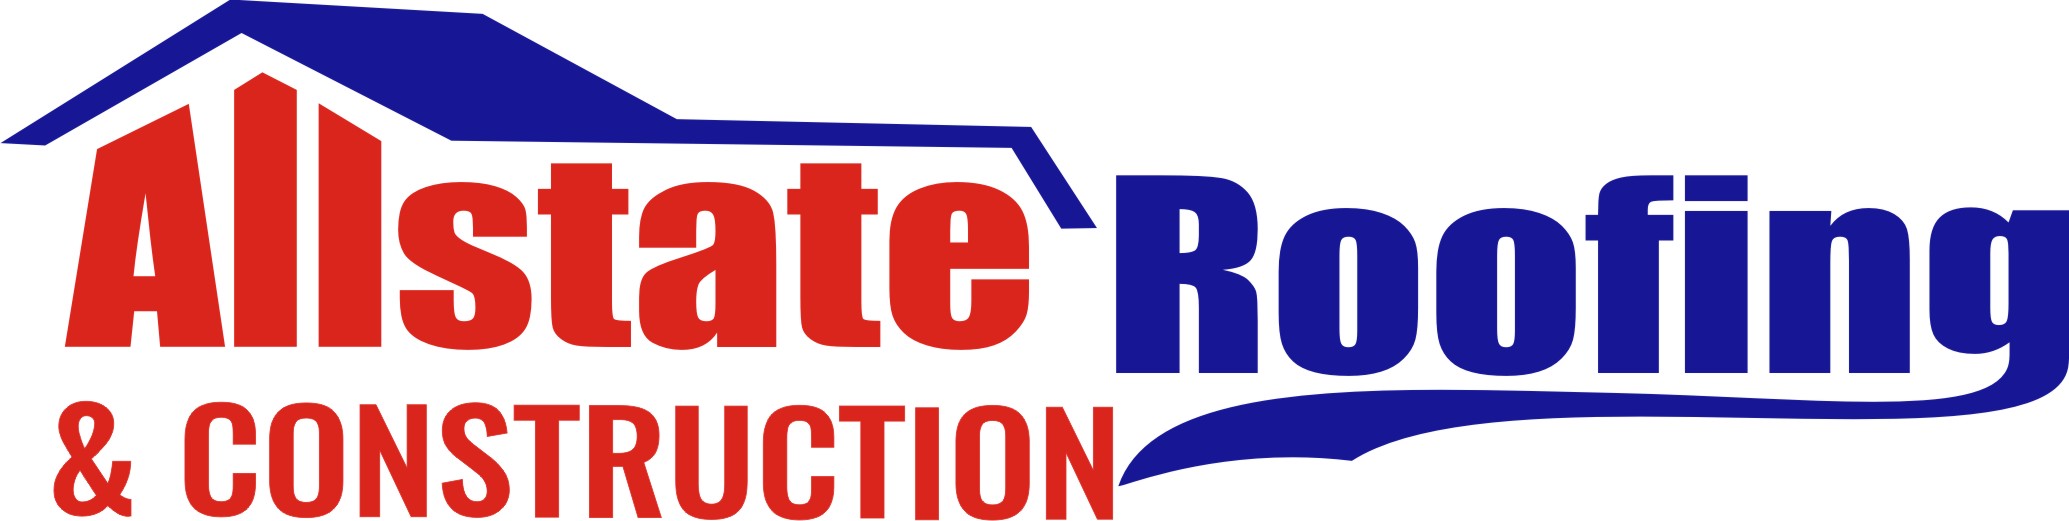 All State Roofing & Construction Logo